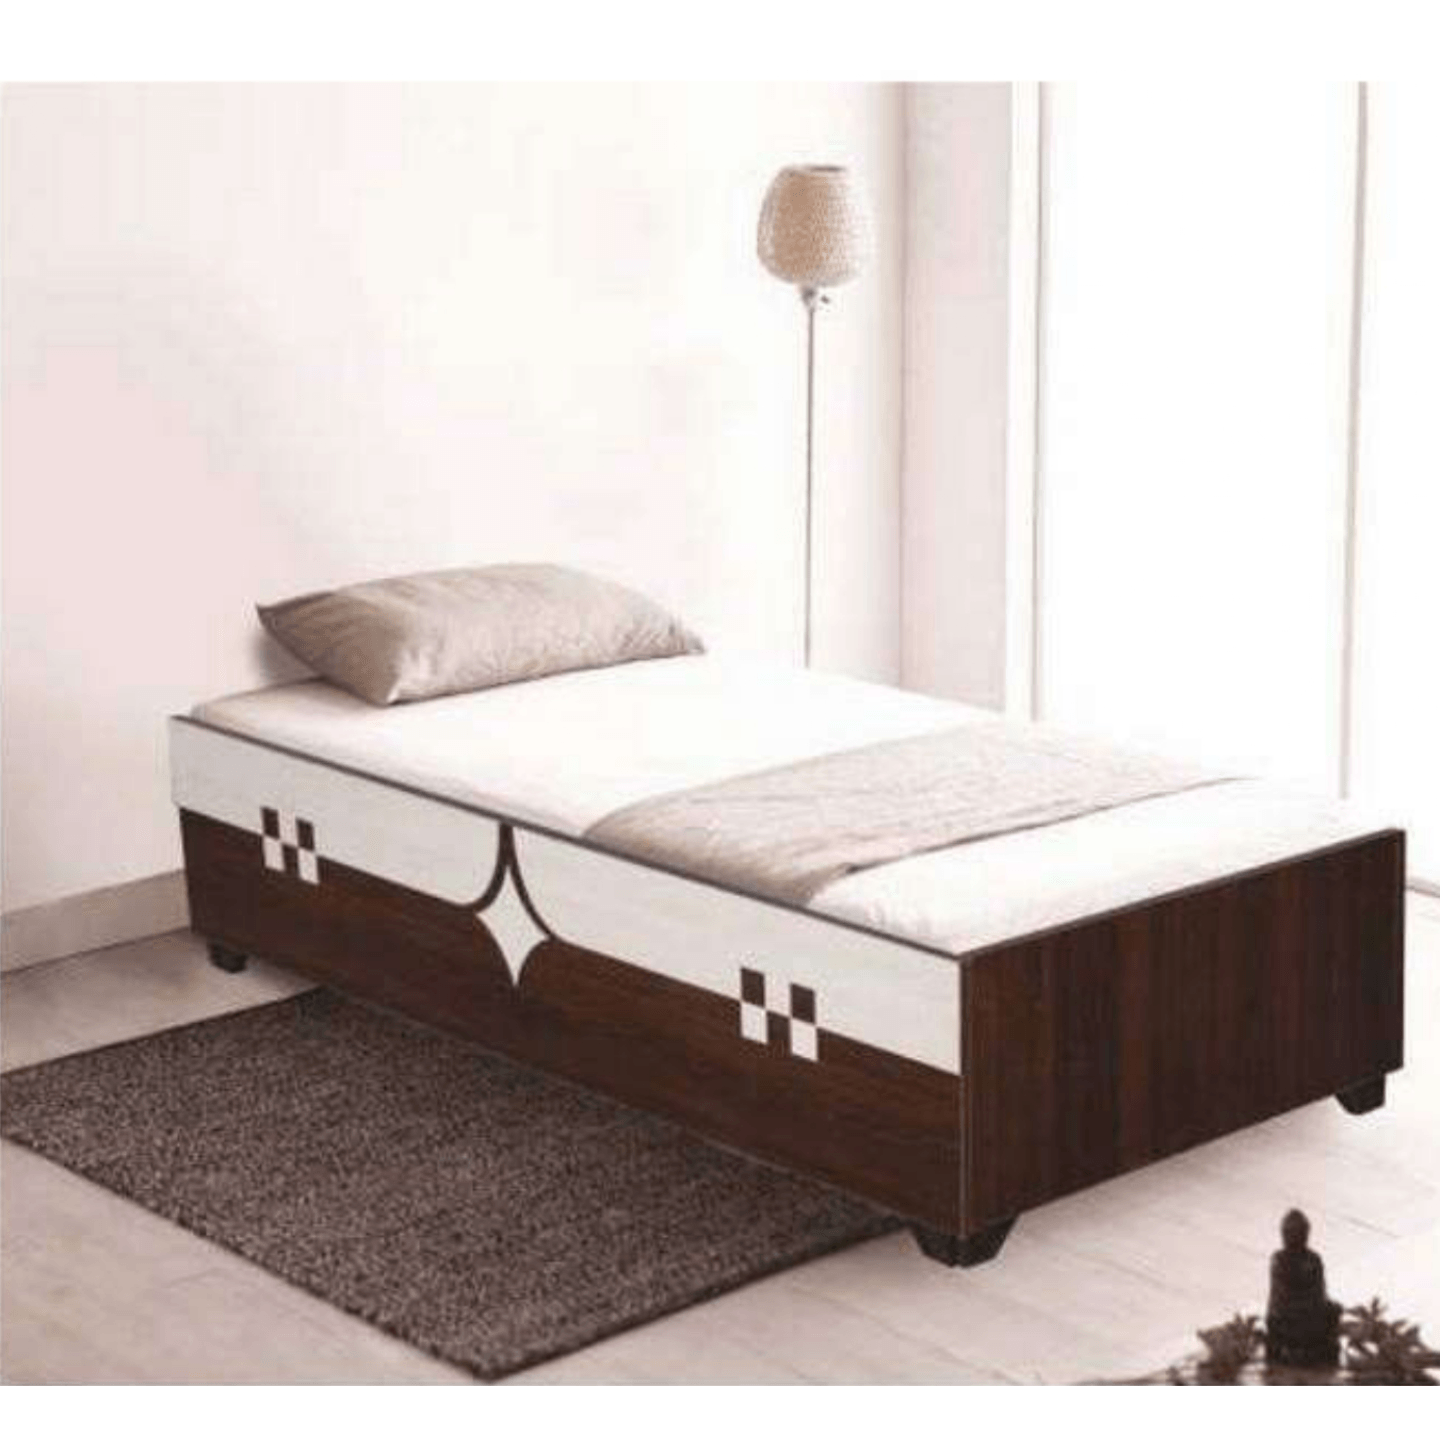 HS Single Bed Size 72"x36" Naira In Wenge Colour